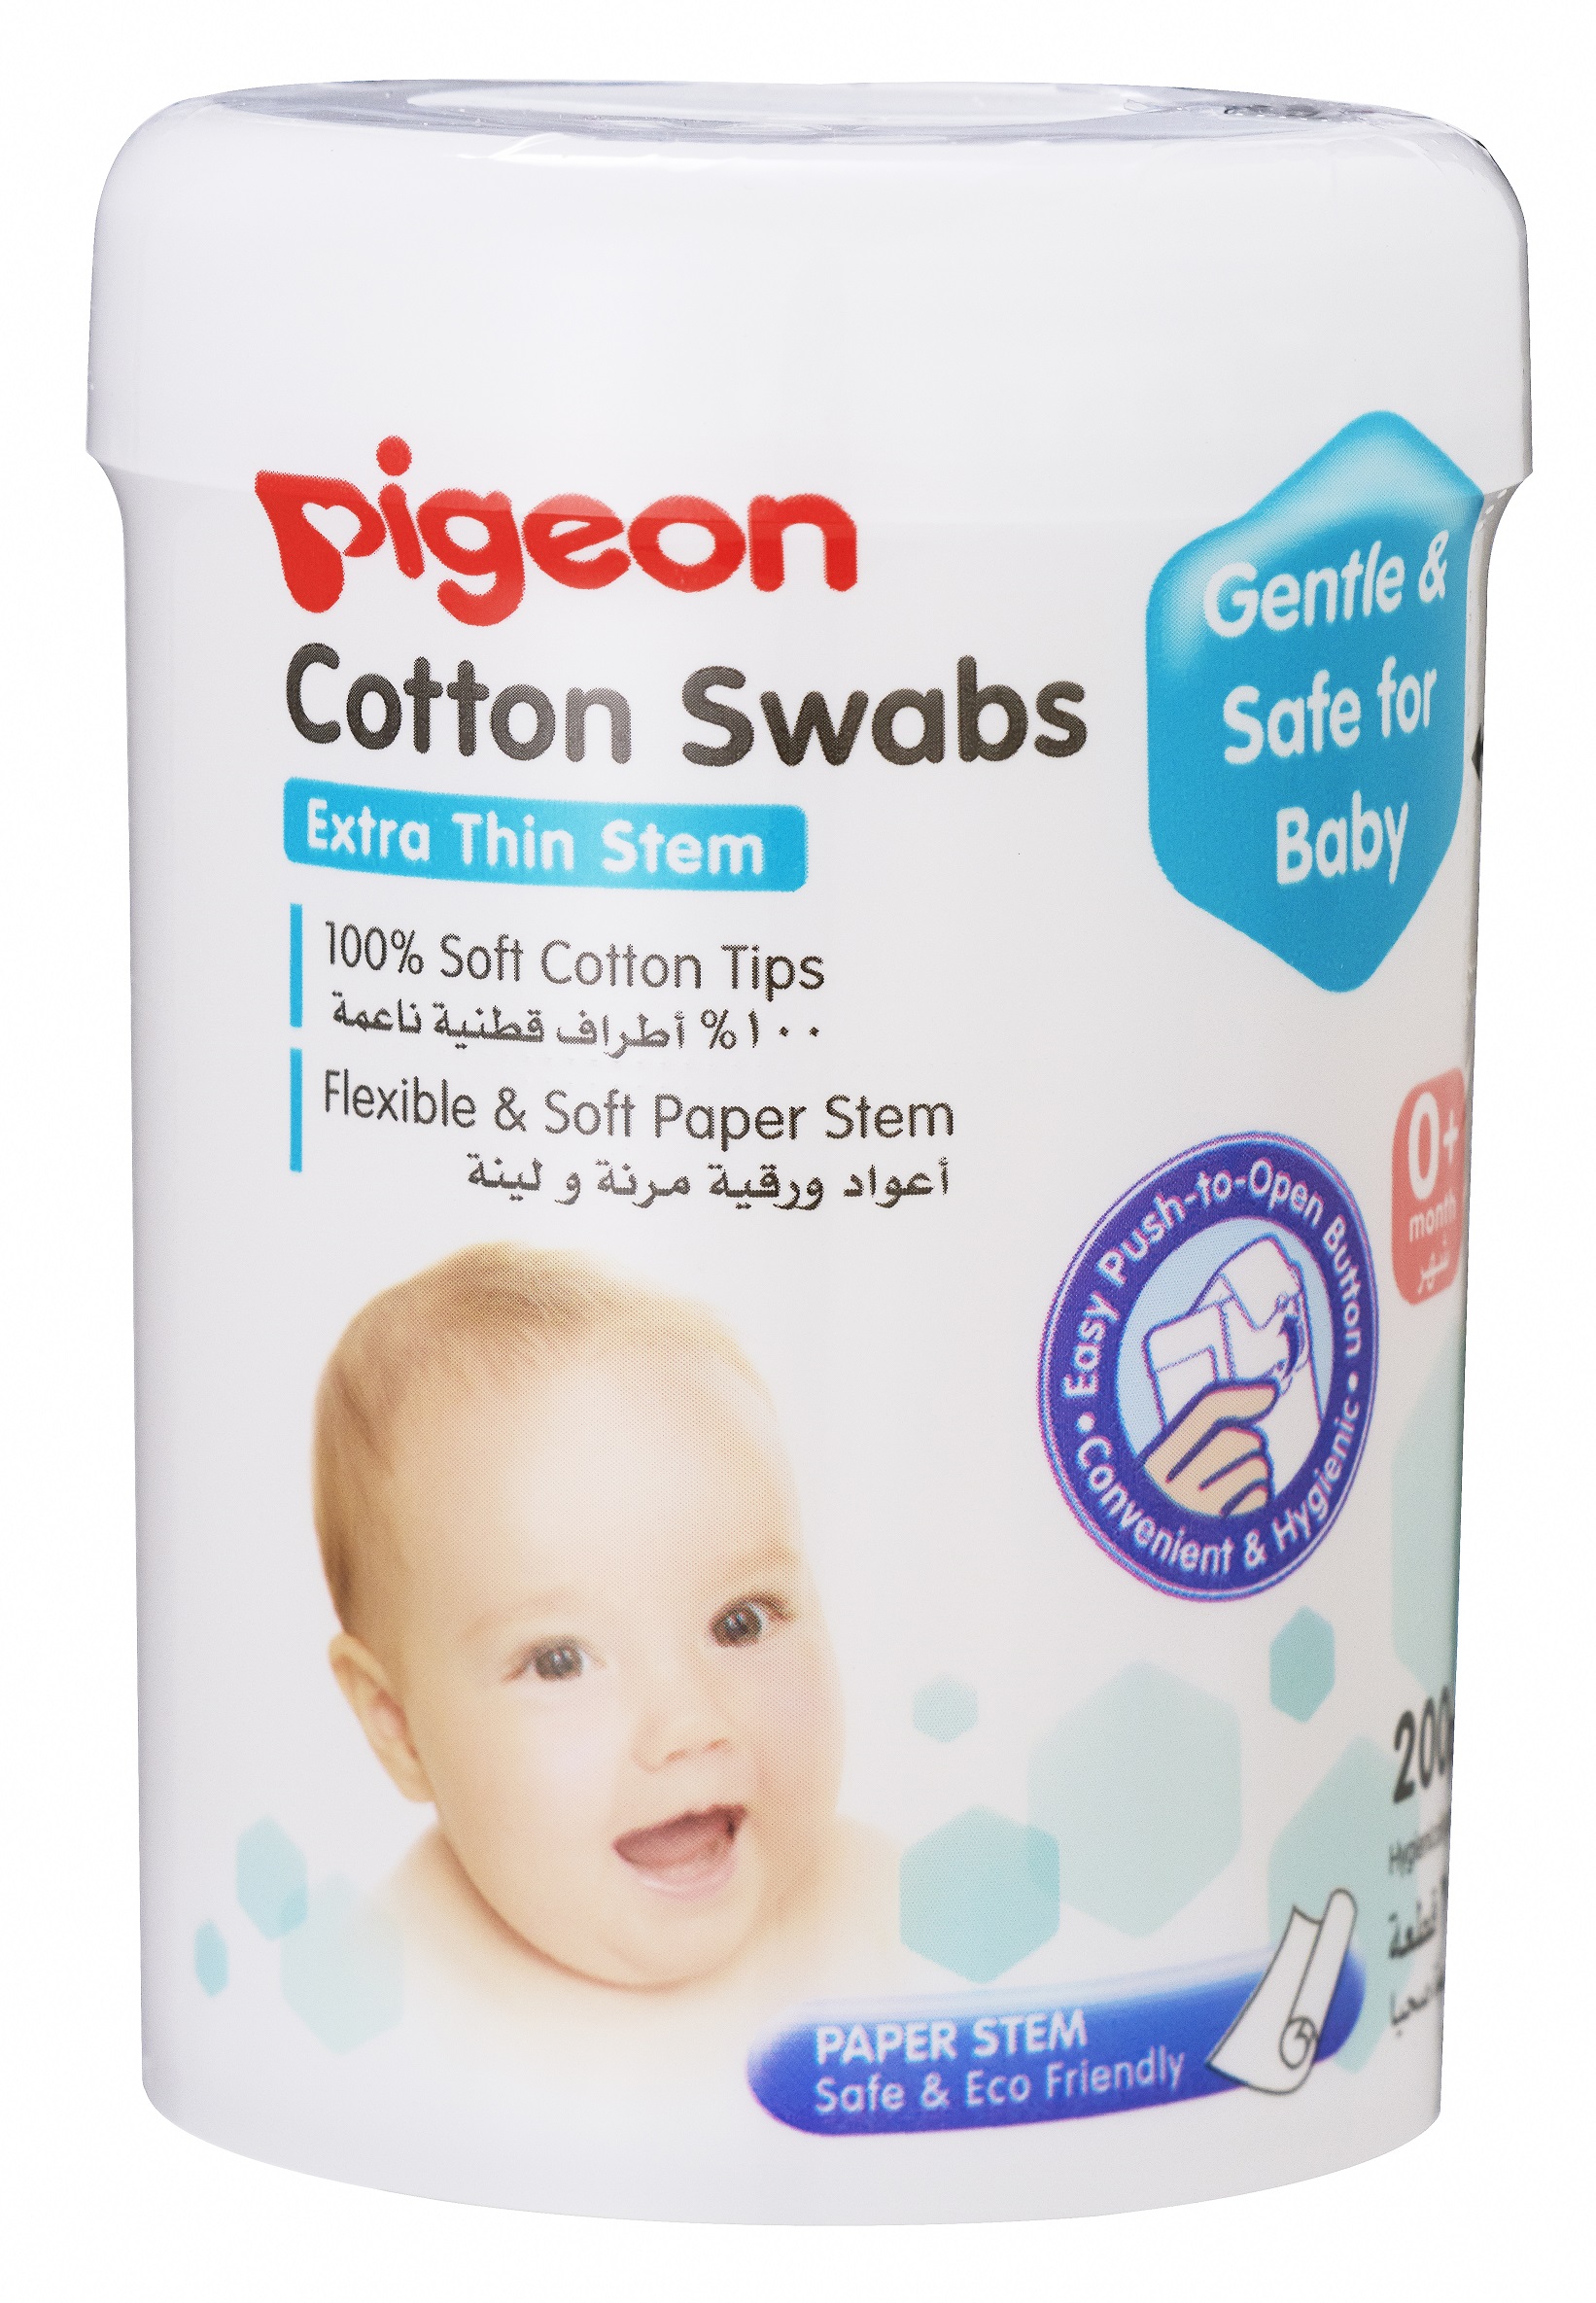 baby-fairPigeon Cotton Swabs Thin Stem 200 Pcs/Hinged Case (PG-26546)